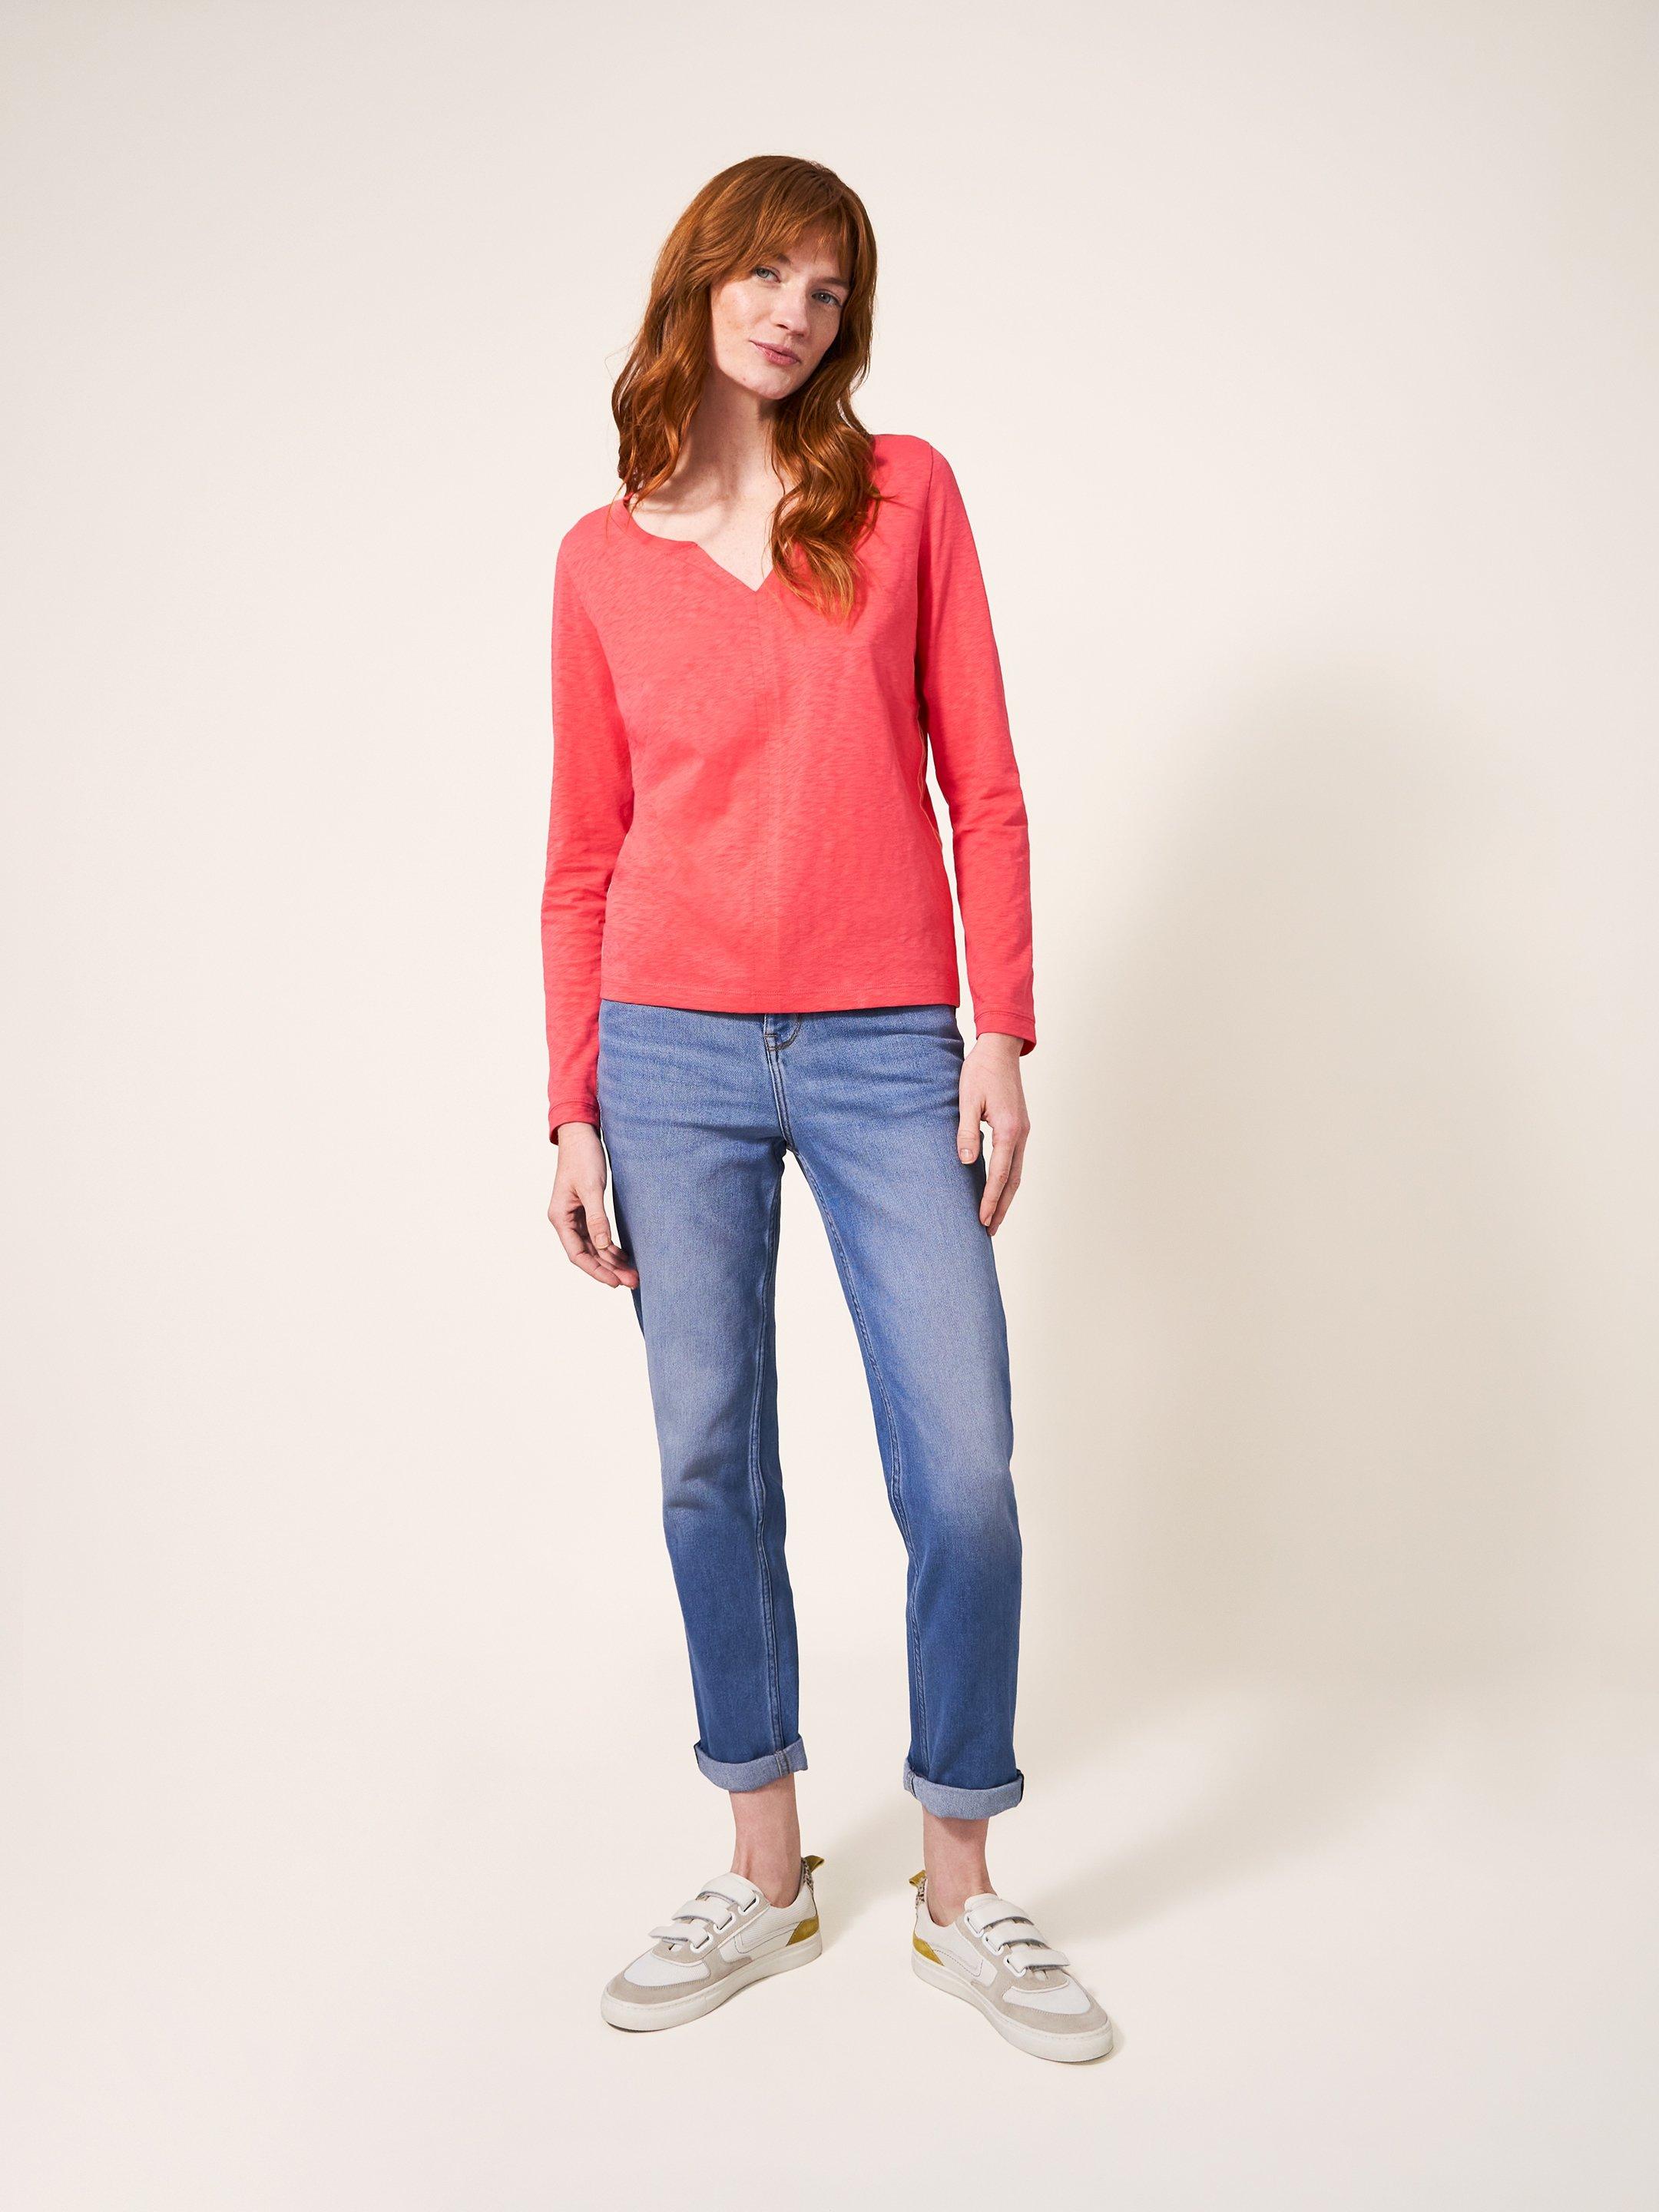 Nelly Long Sleeve T-Shirt in BRT PINK - MODEL FRONT